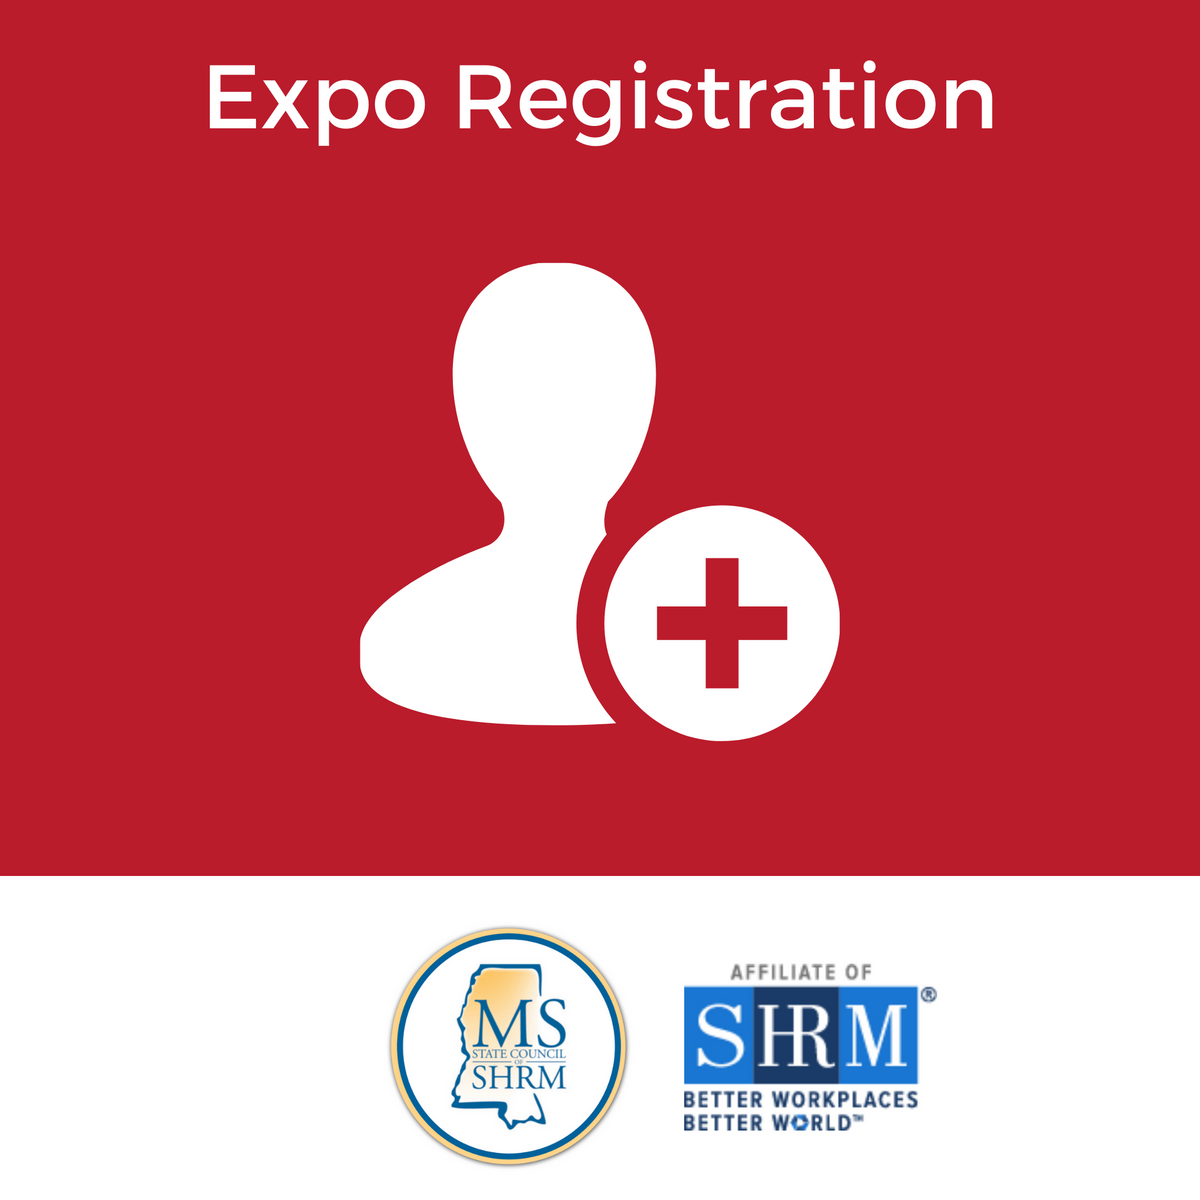 23 MS SHRM Annual - Expo Registration